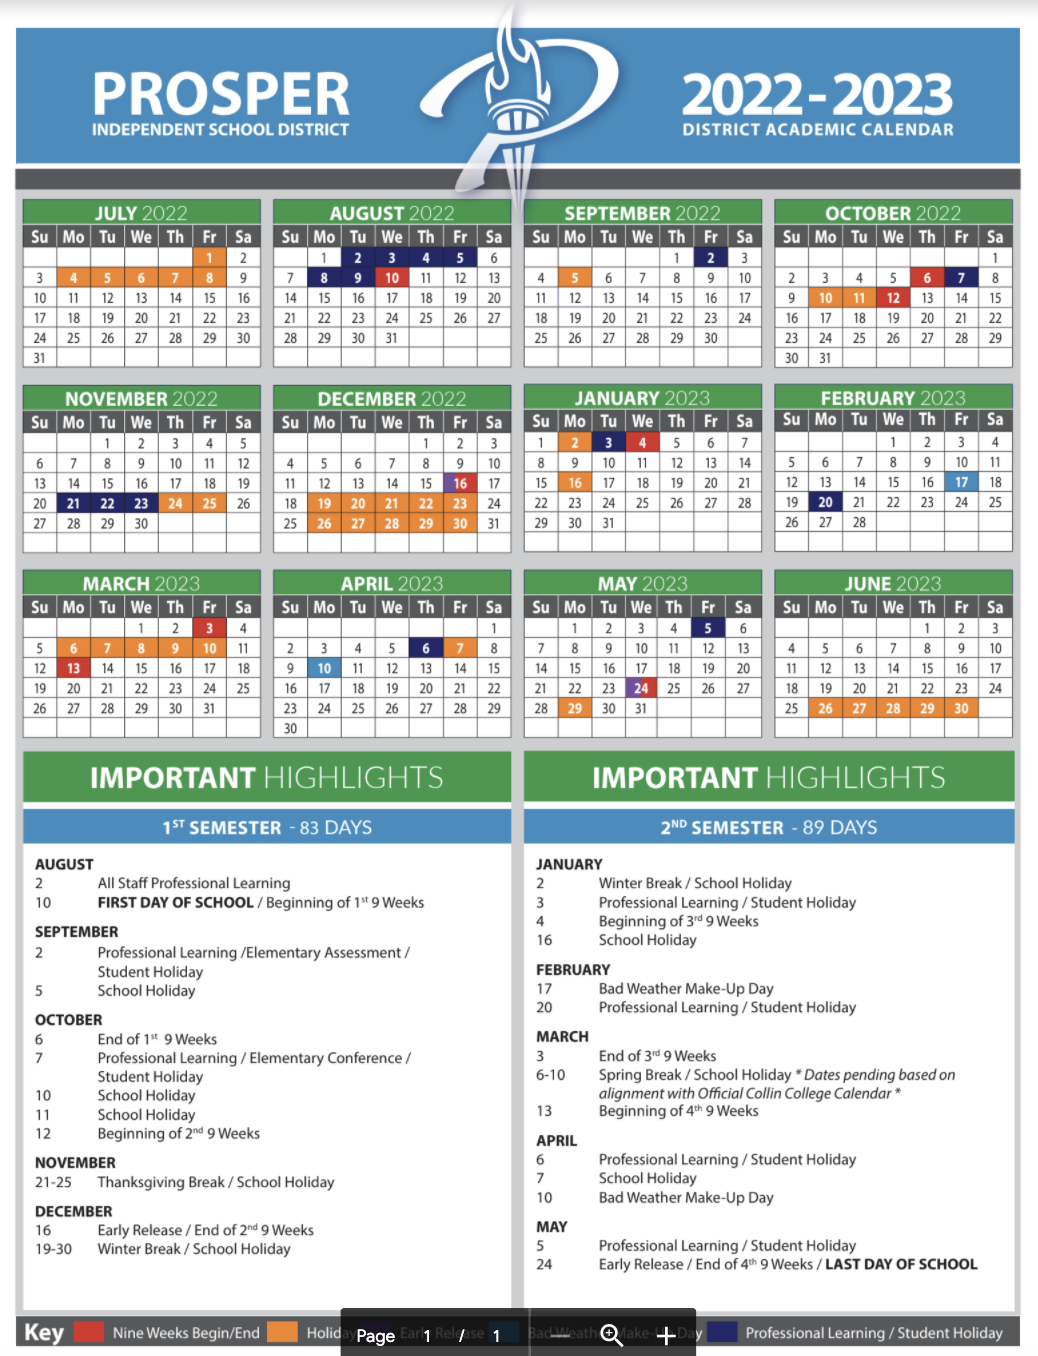 Collin College Calendar 2022 Here Are Prosper Isd's School Calendars For The 2022-2023 And The 2023-2024  School Years | Cities | Checkoutdfw.com